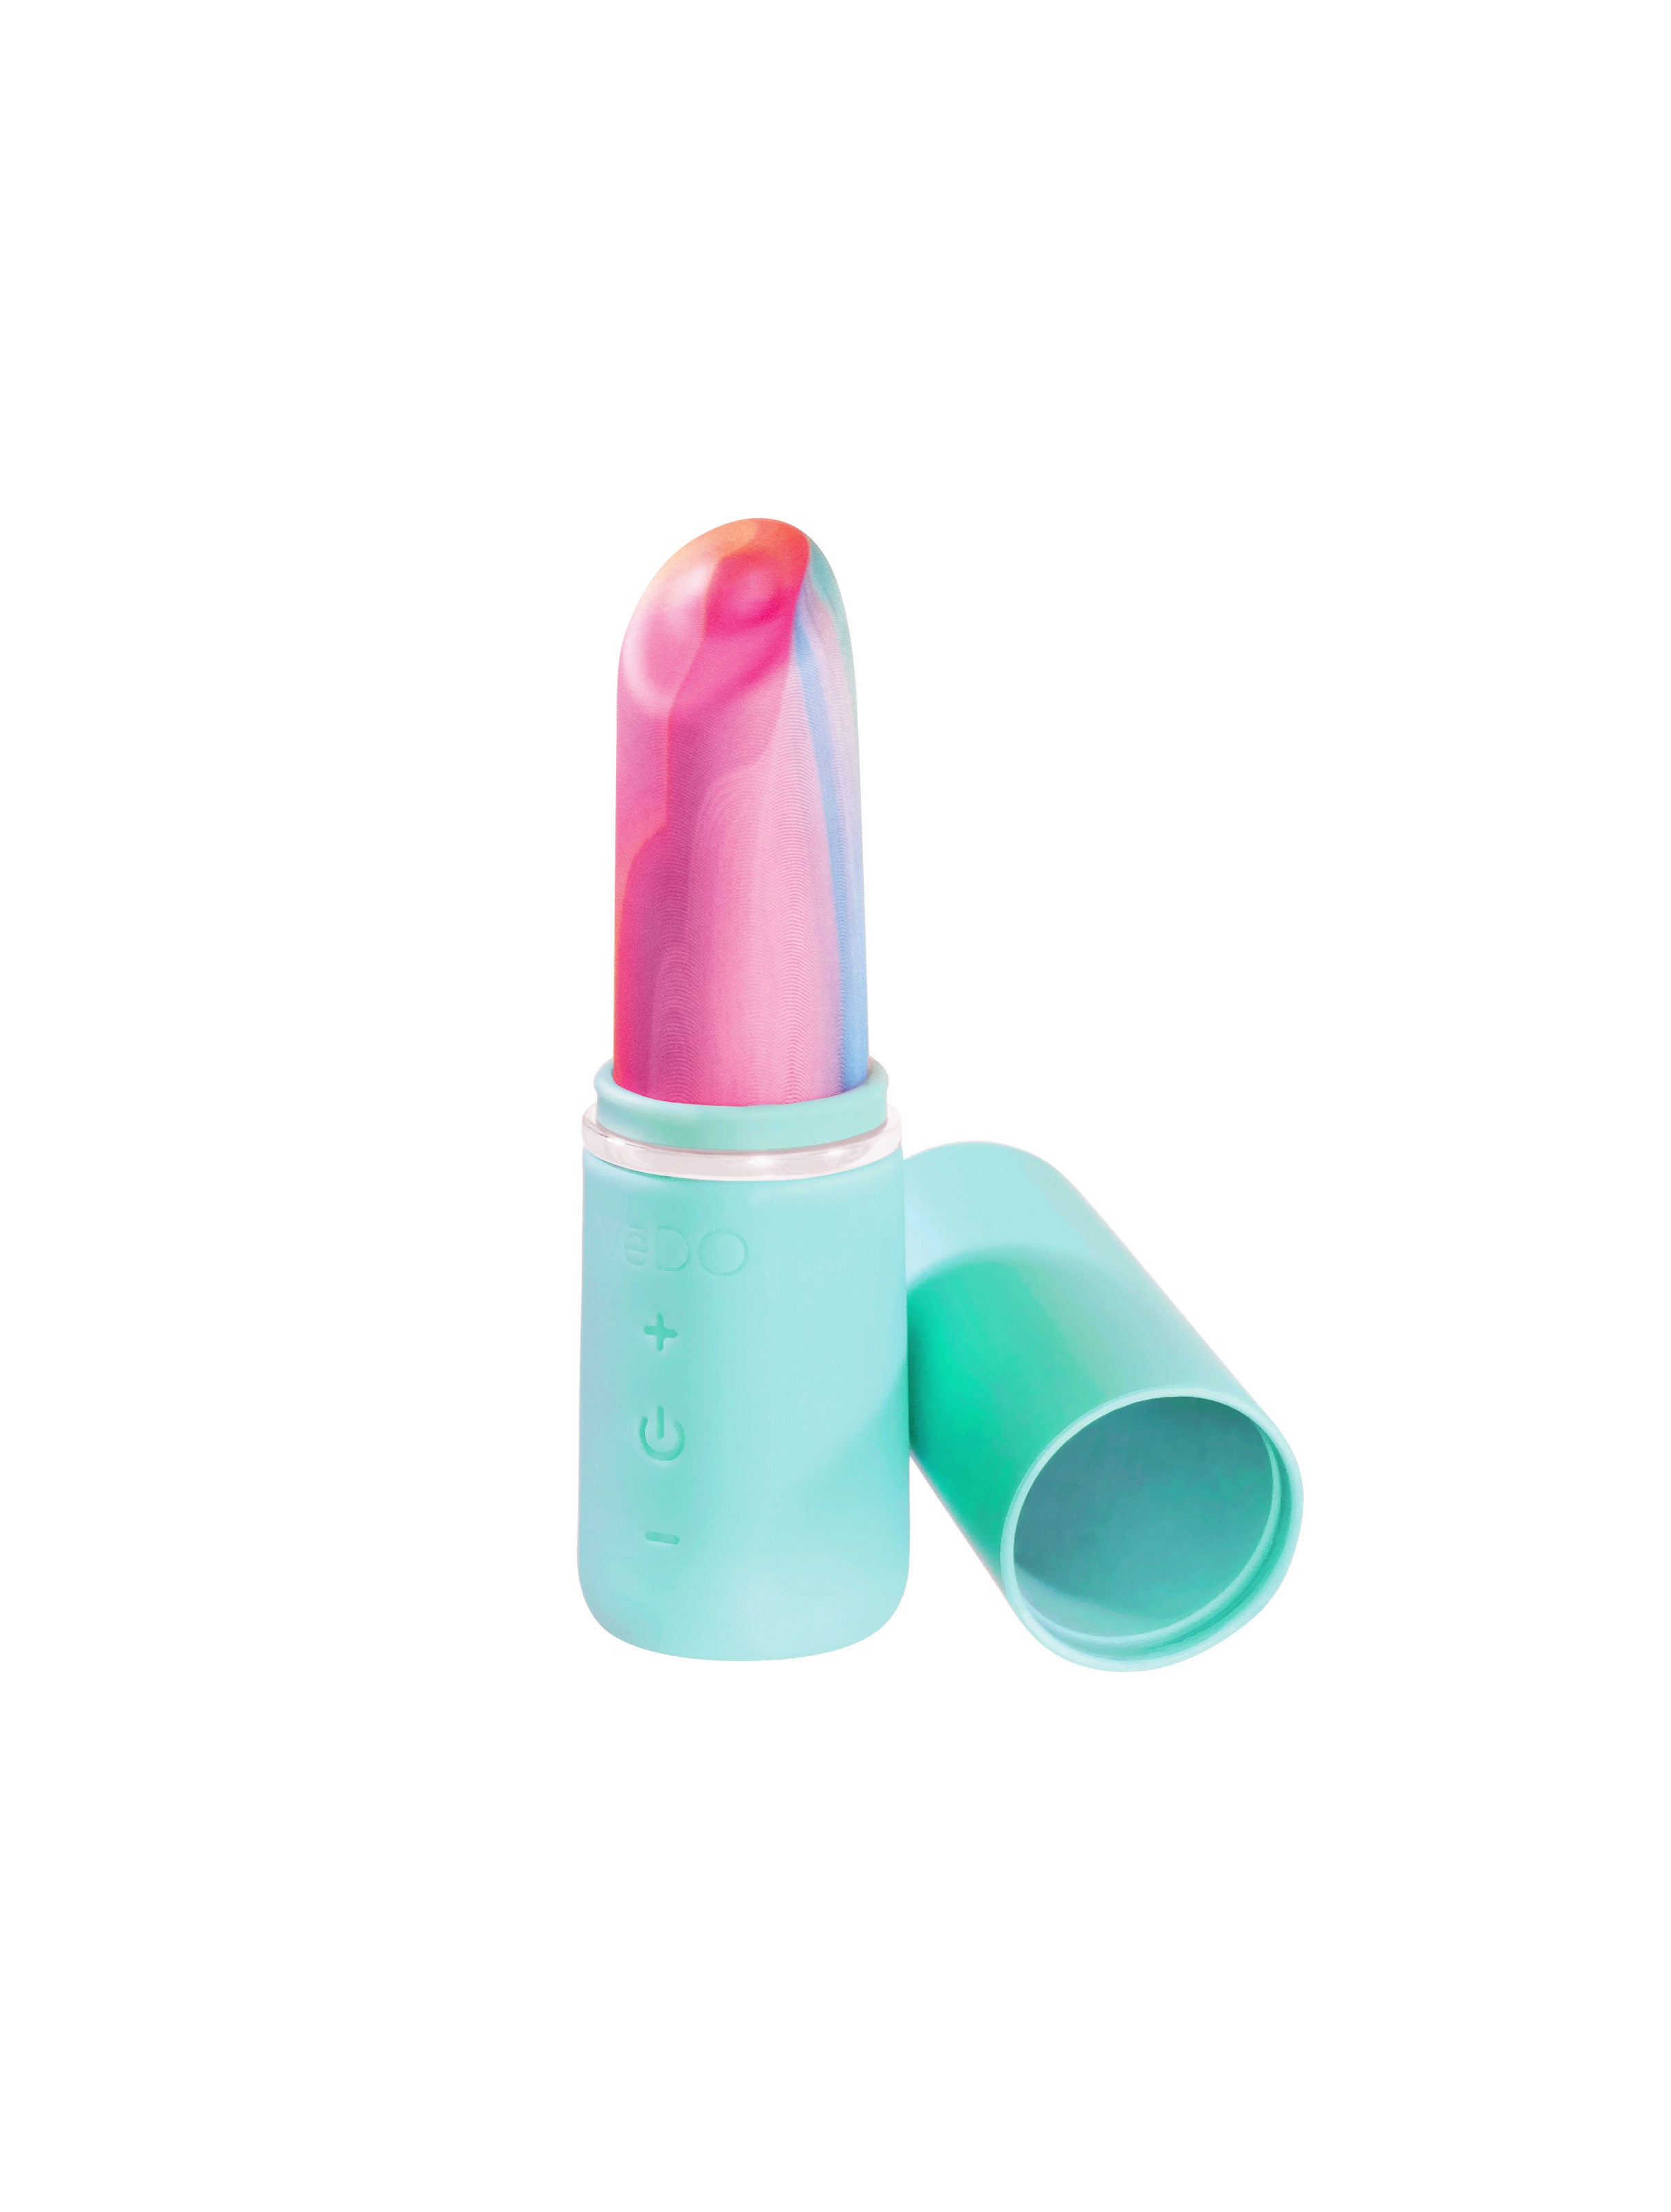 Retro Rechargeable Bullet - Turquoise-4